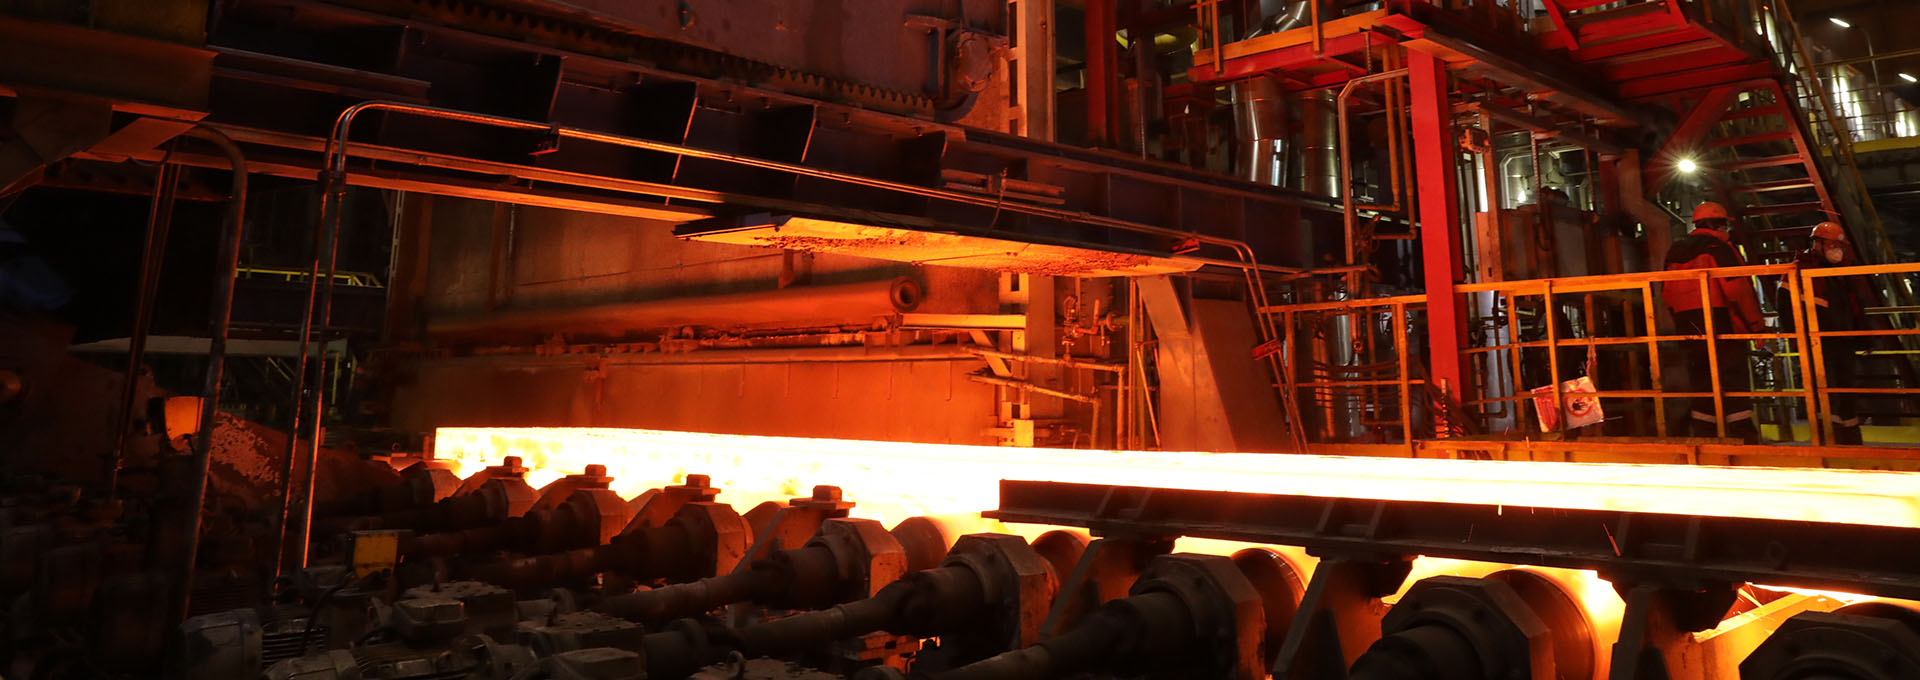 Stein Digit@l Furnace® from Fives at Severstal